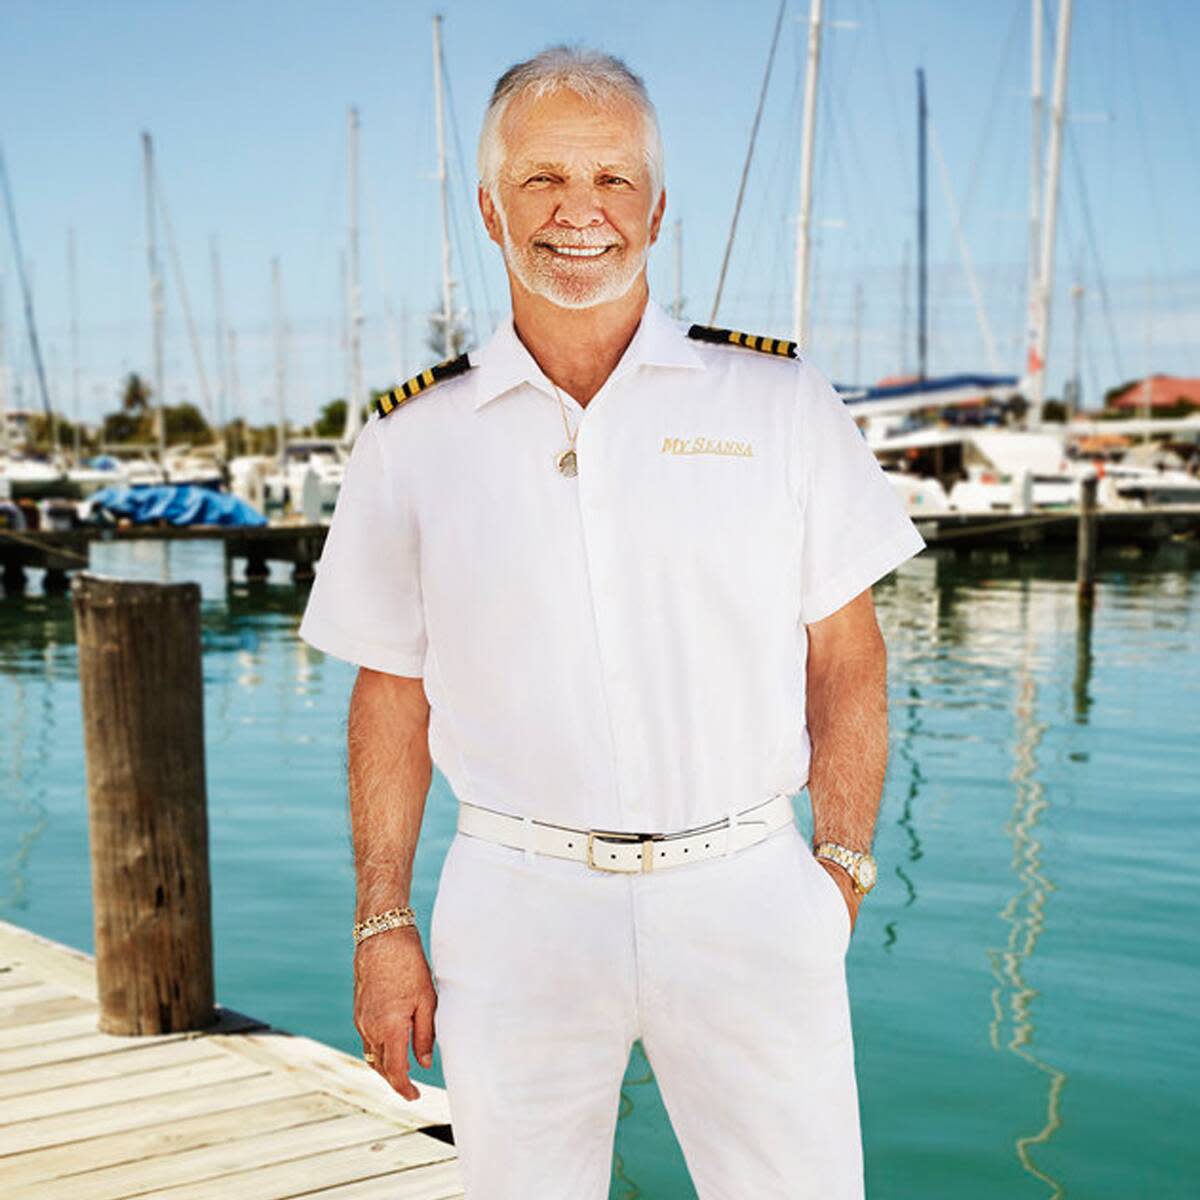 List 96+ Images why is captain lee walking with a cane Full HD, 2k, 4k